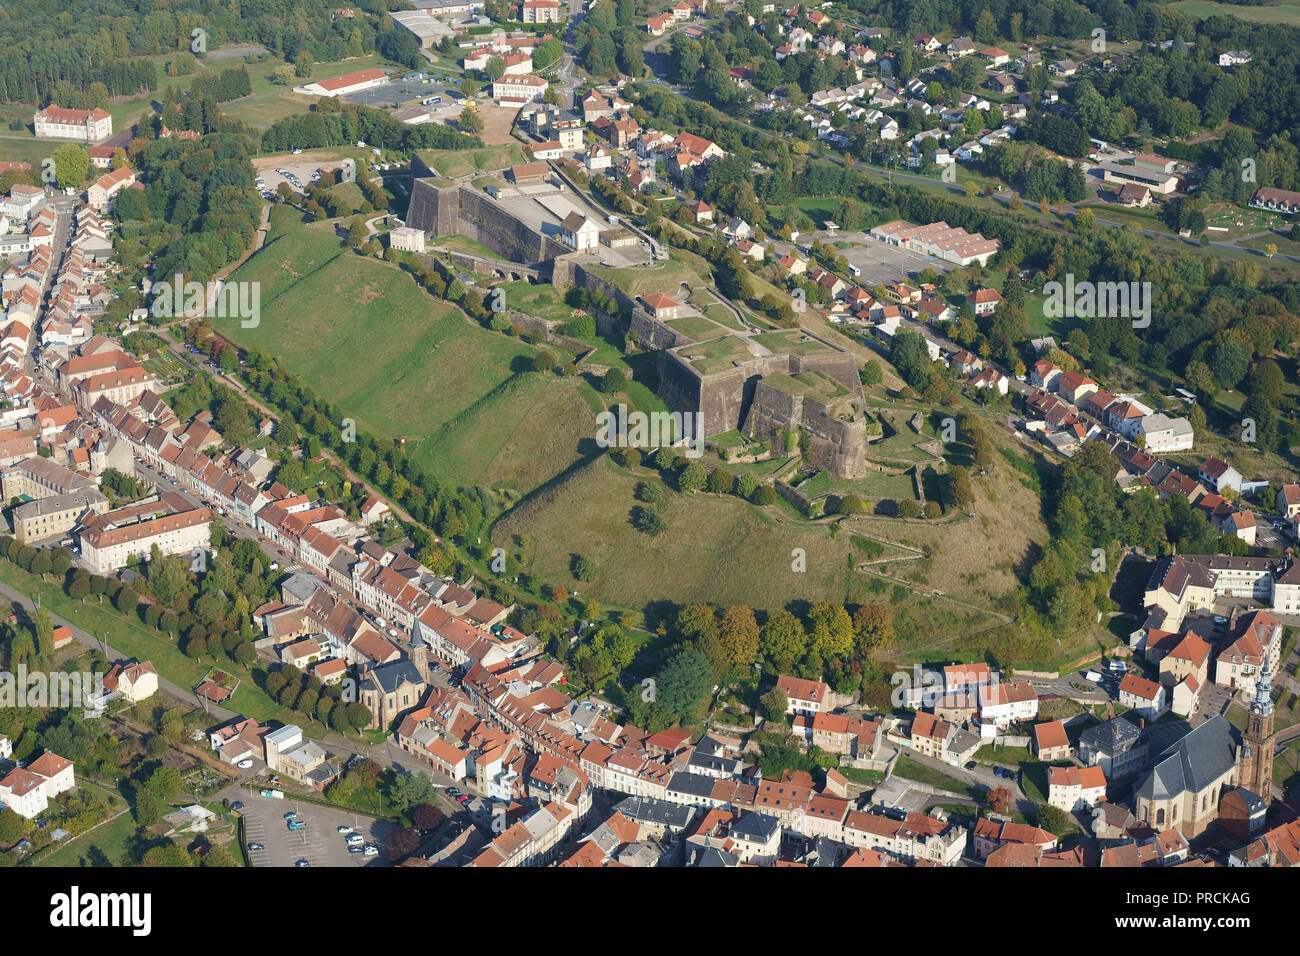 AERIAL VIEW. Medieval hilltop citadel overlooking the newest town. Bitche, Moselle, Lorraine, Grand Est, France. Stock Photo